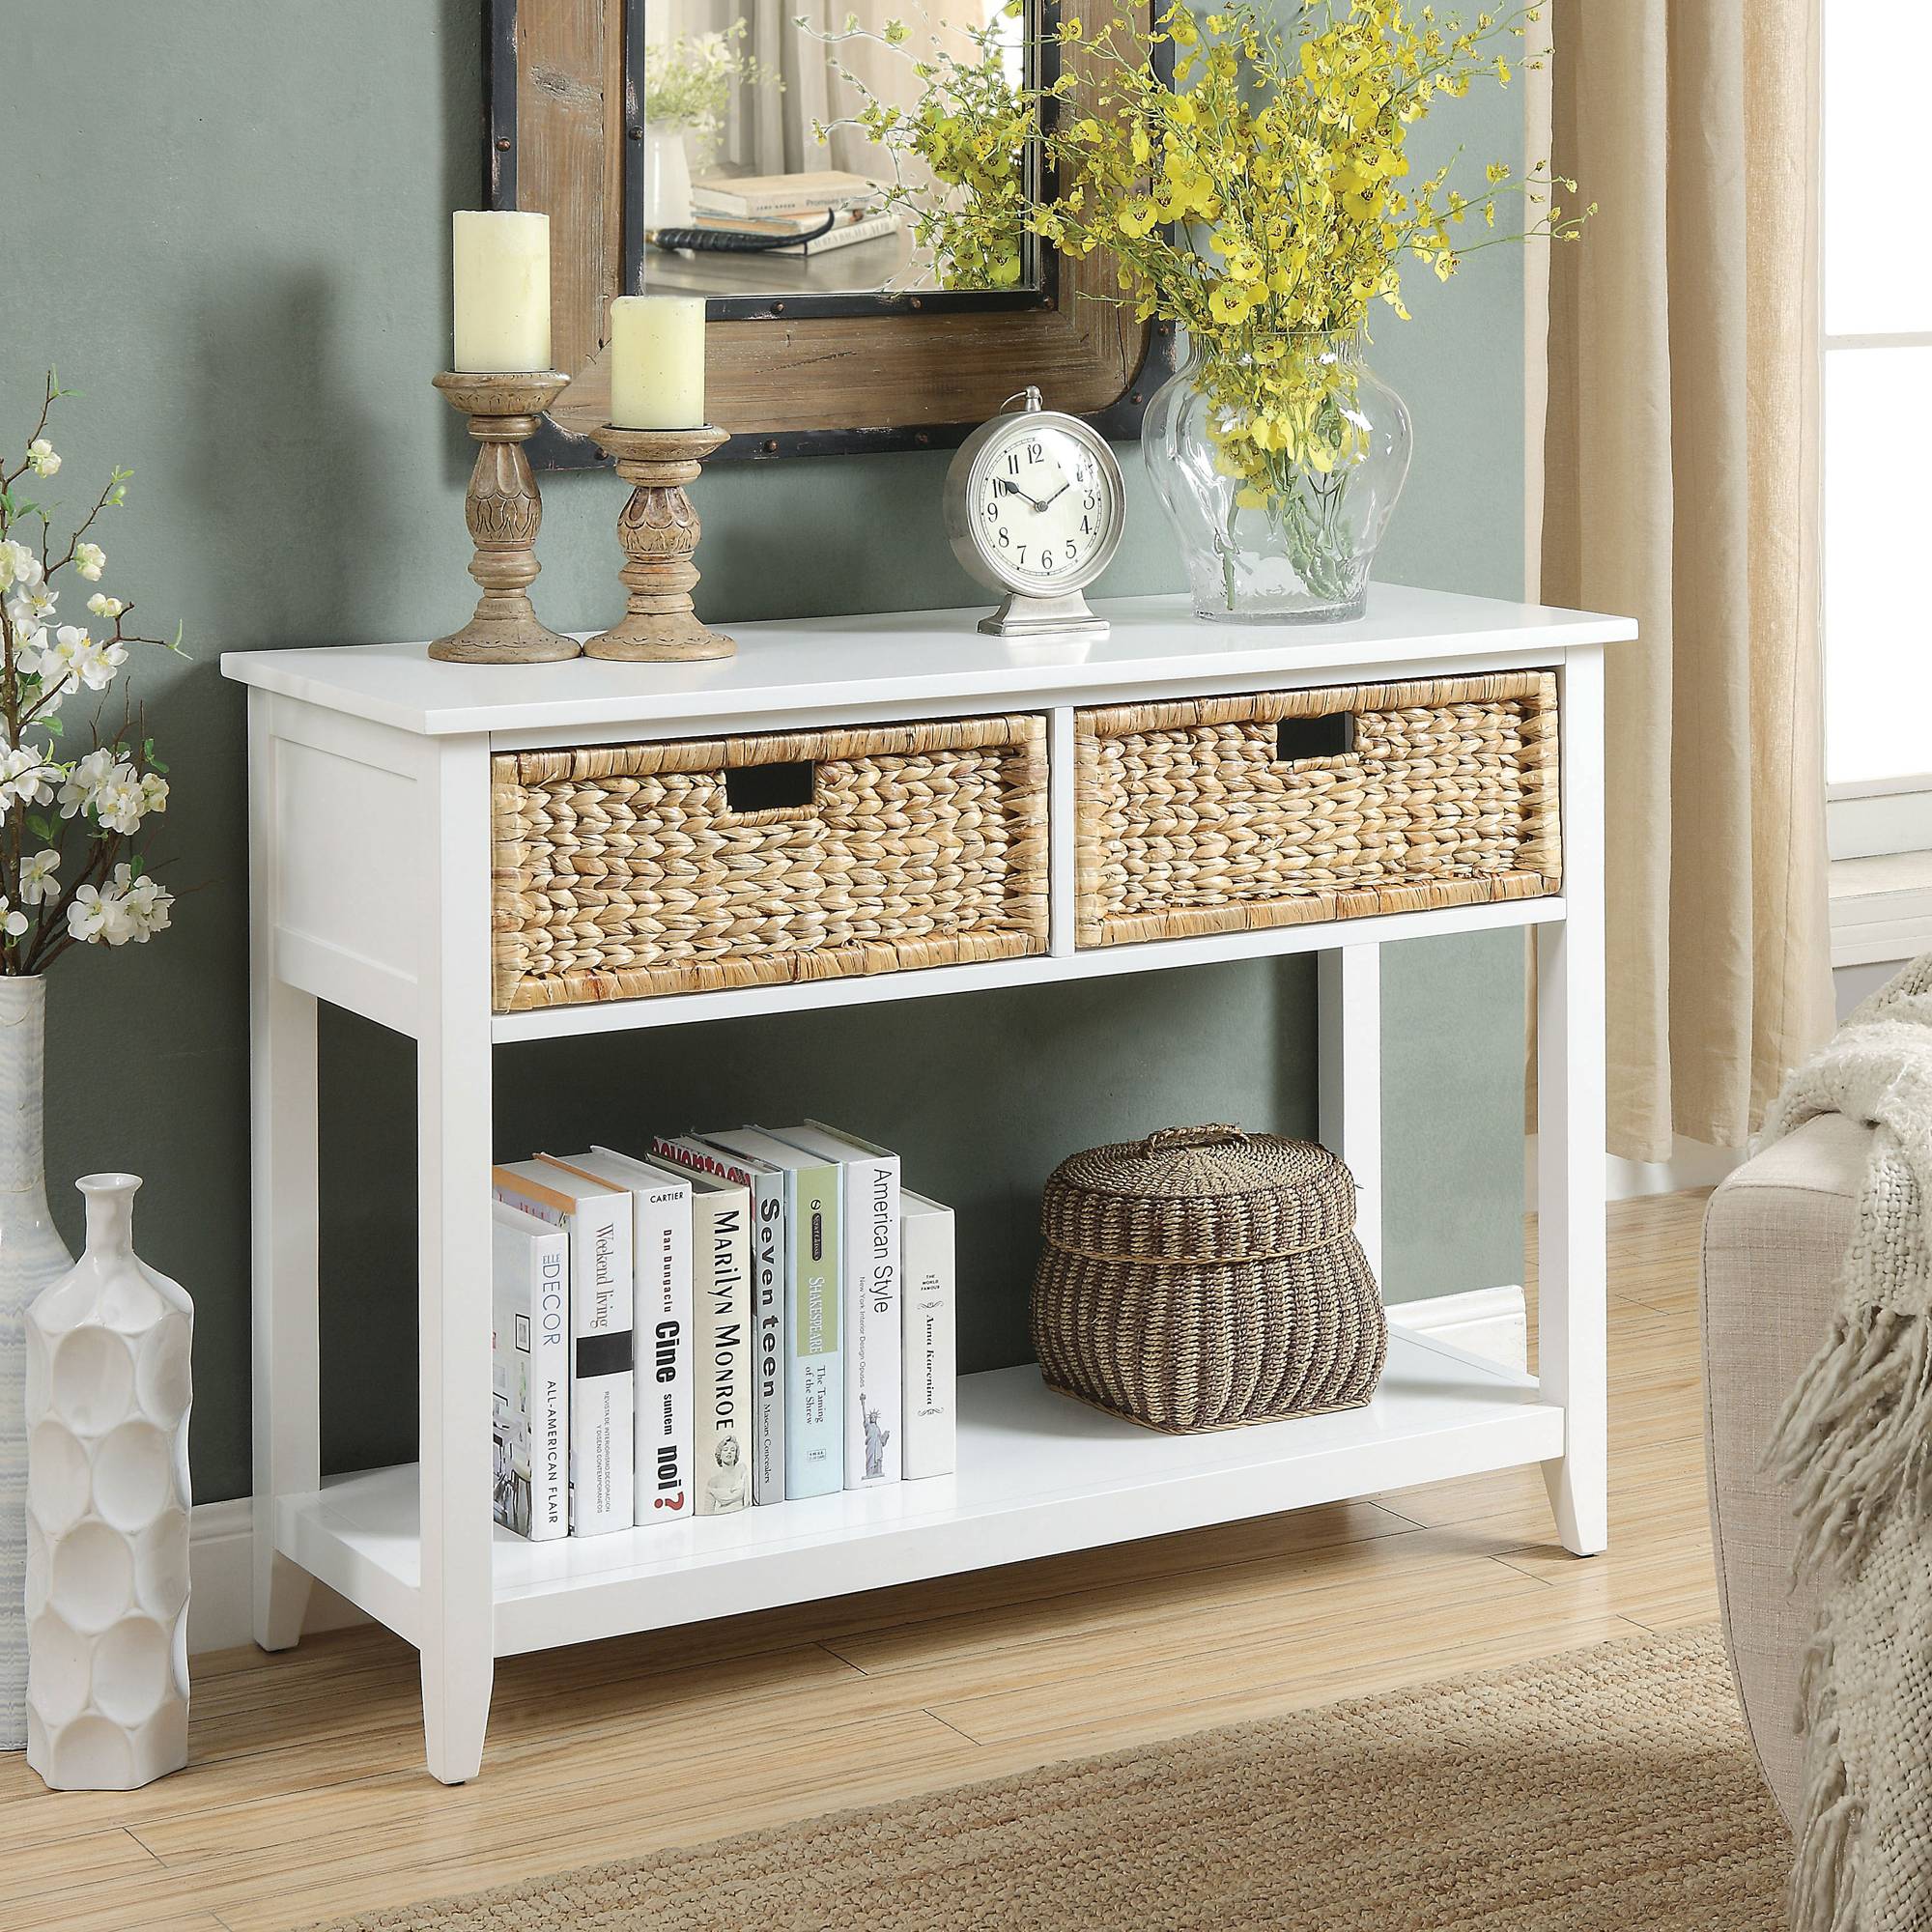 Flavius 44" Wide White 2Drawer Wood Console Table eBay